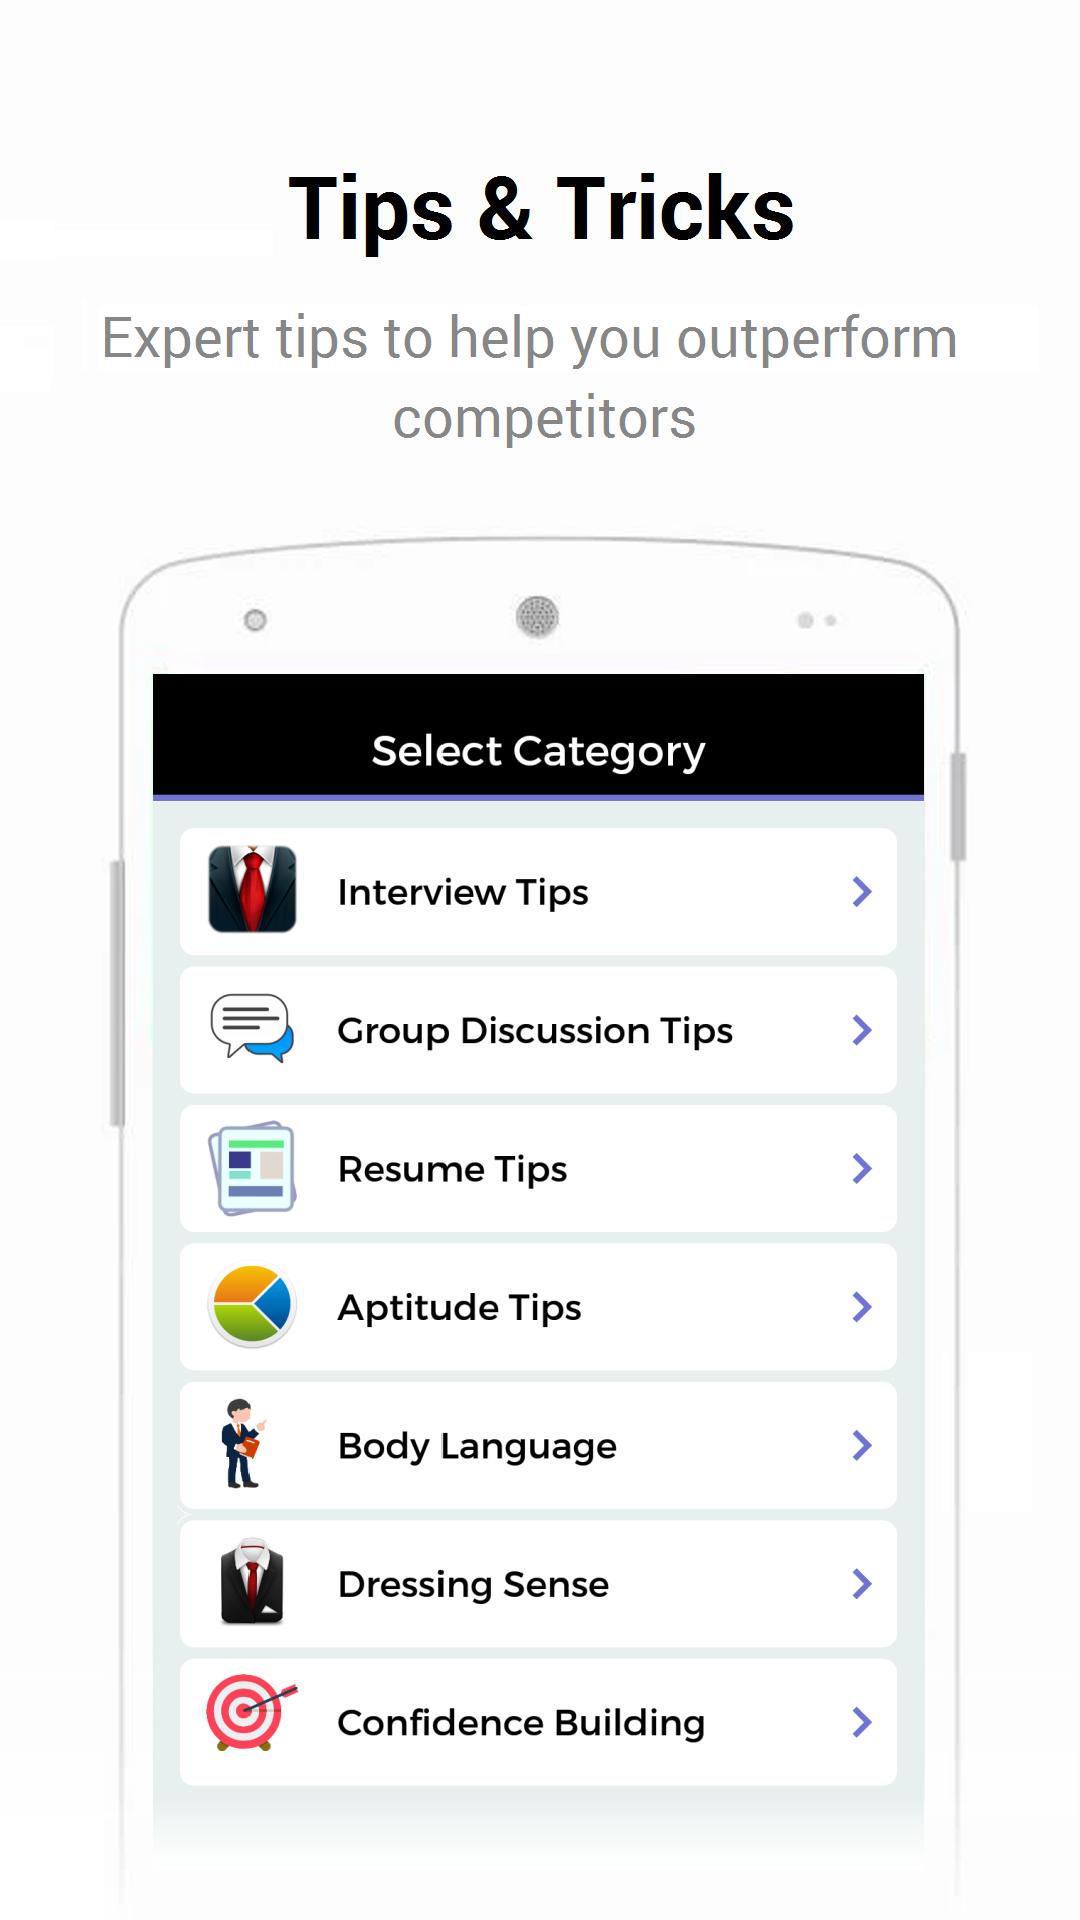 aptitude-test-preparation-apk-for-android-download